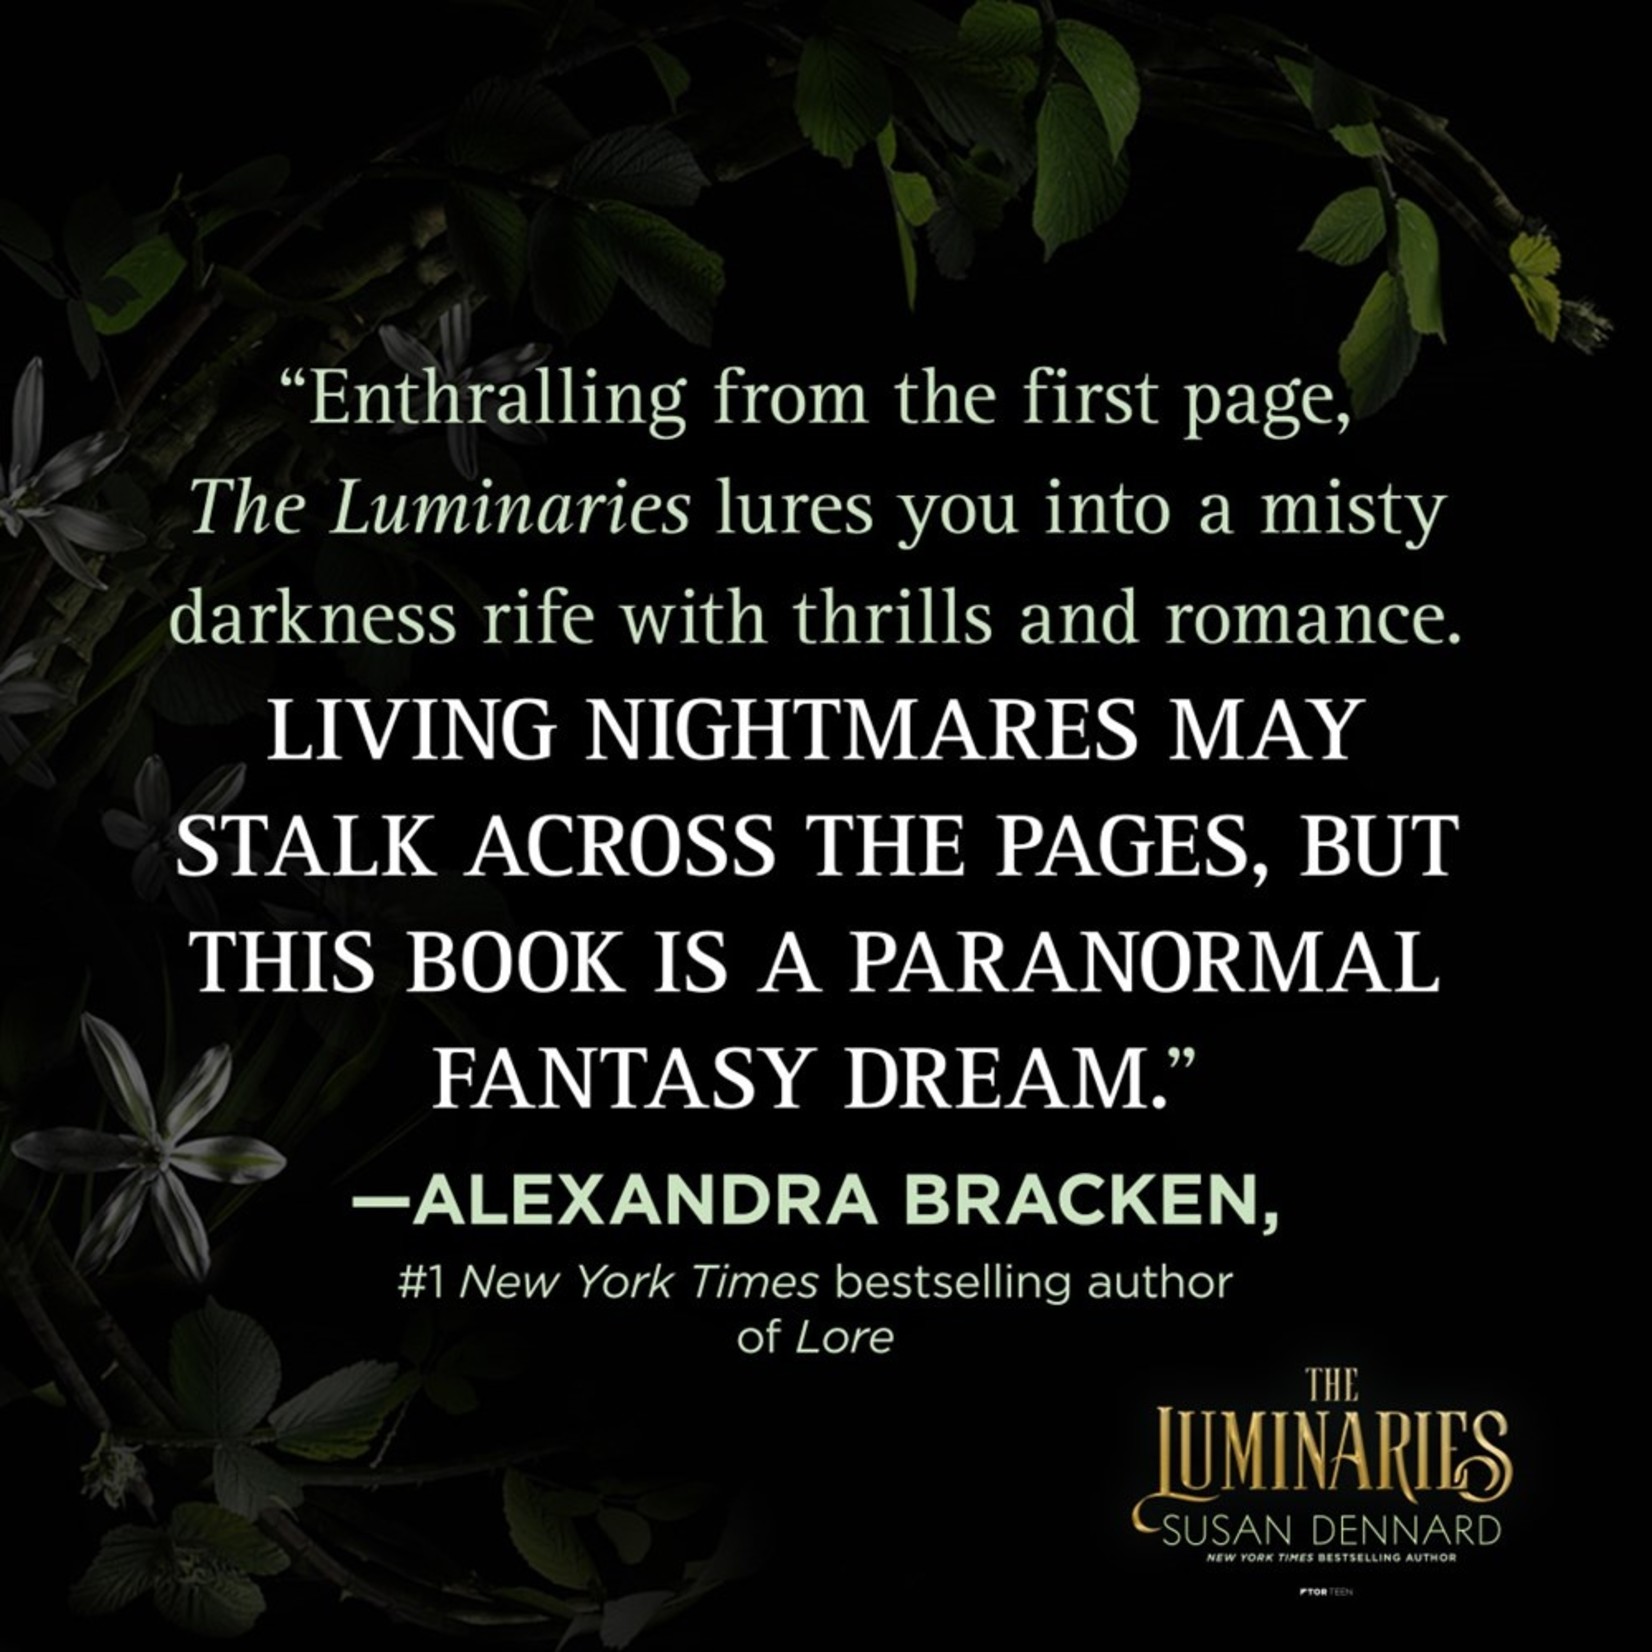 The Luminaries - SIGNED COPY PREORDER